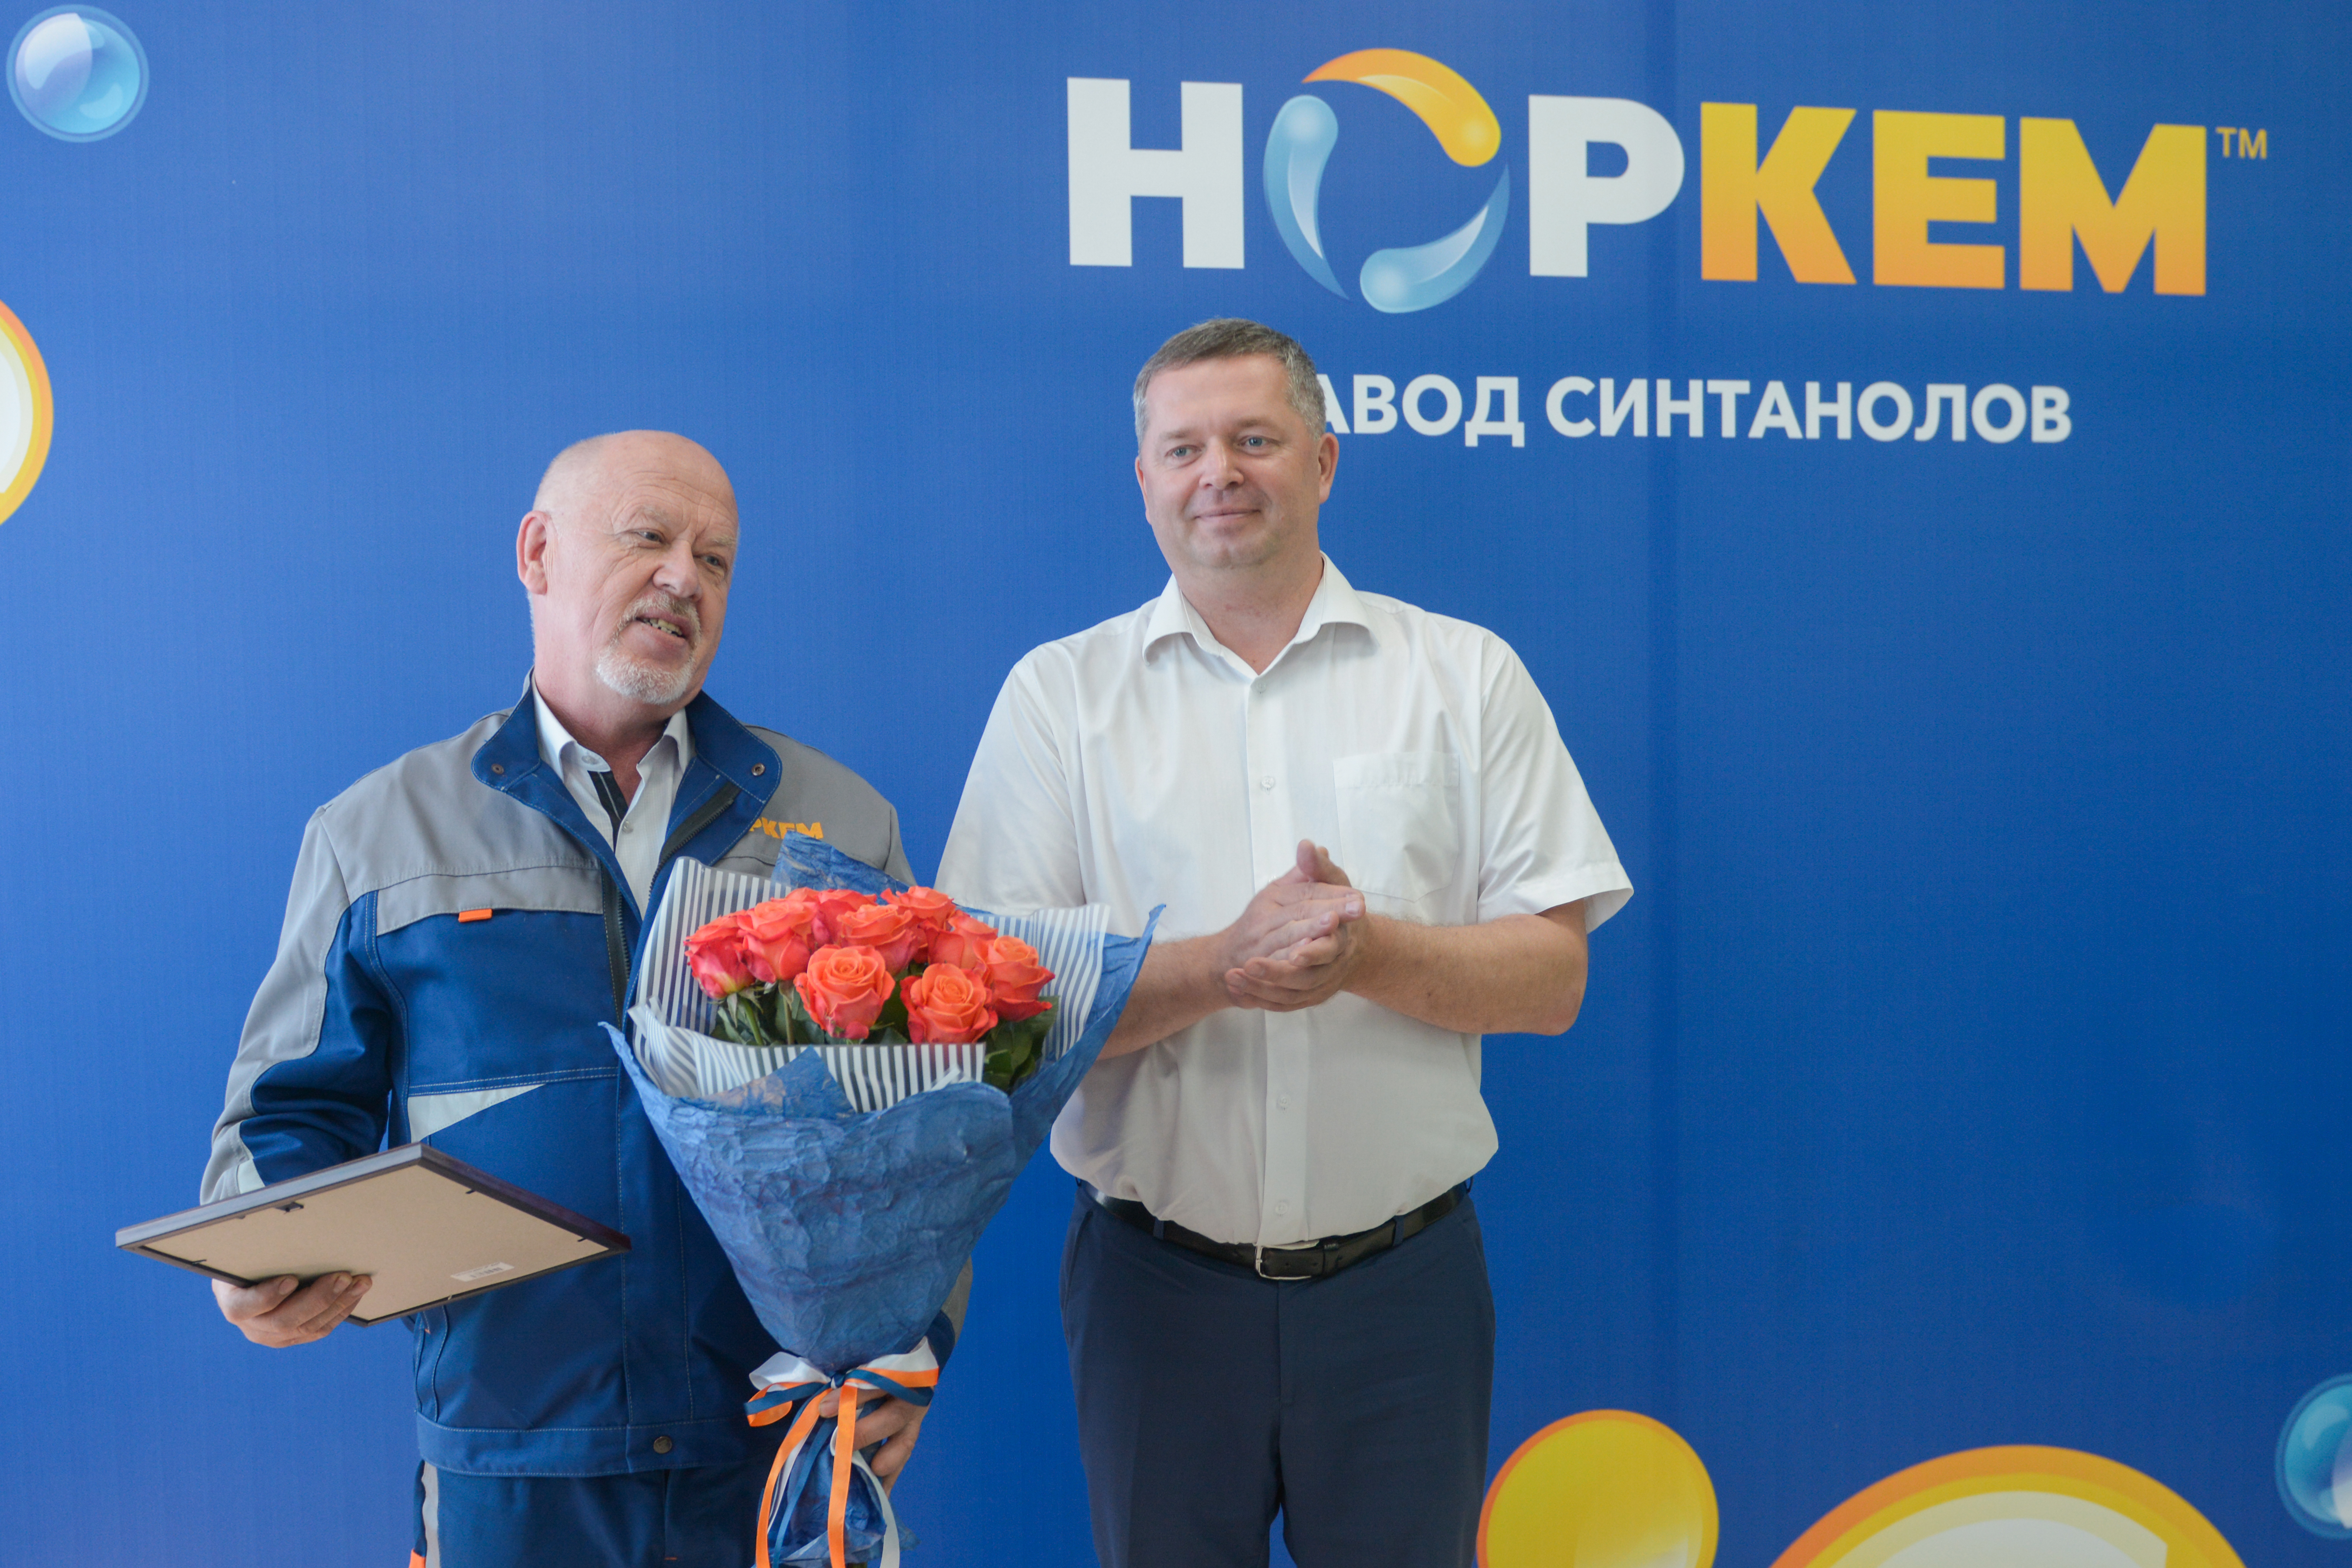 THE EMPLOYEE OF Zavod sintanolov LLC IS AWARDED THE TITLE "HONORARY CHEMIST OF THE RUSSIAN FEDERATION"